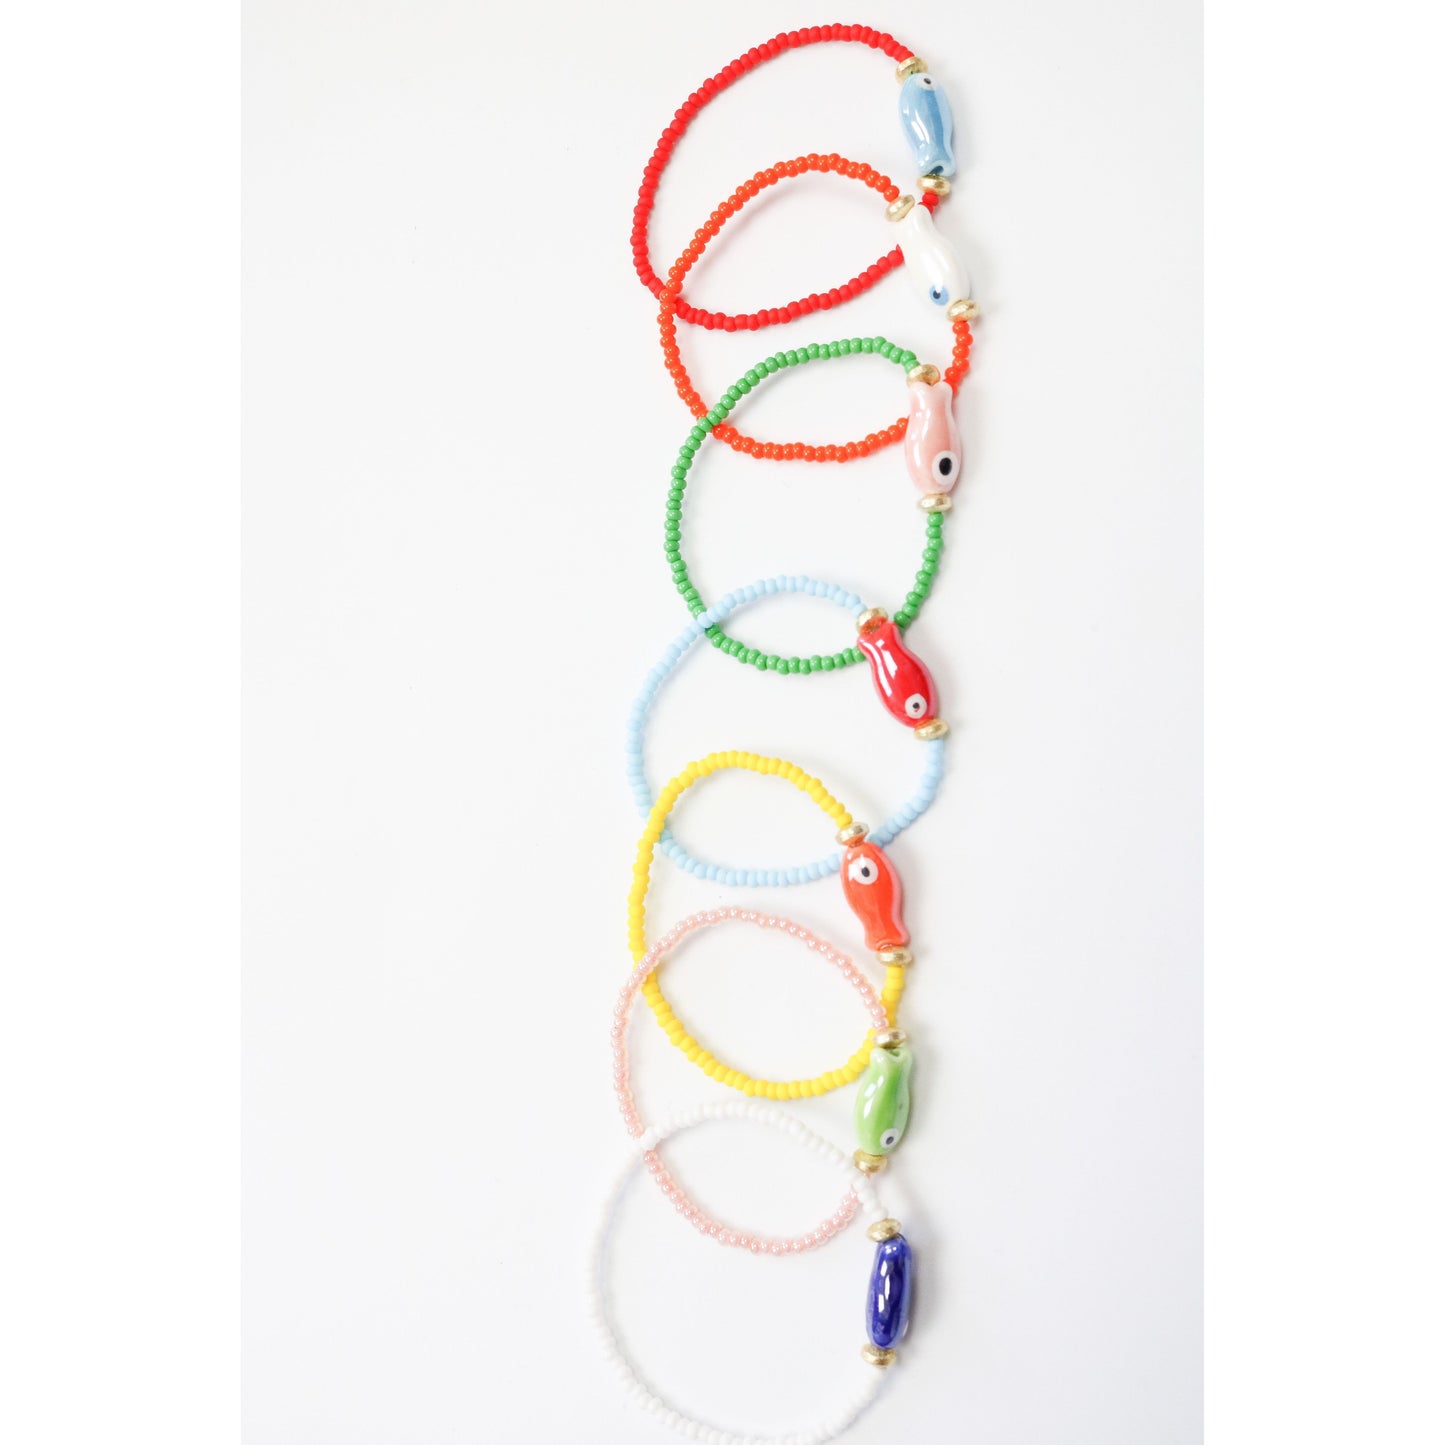 An assortment of colorful bracelets in a line. The image shows a single painted ceramic fish bead on a colored glass bead bracelet.